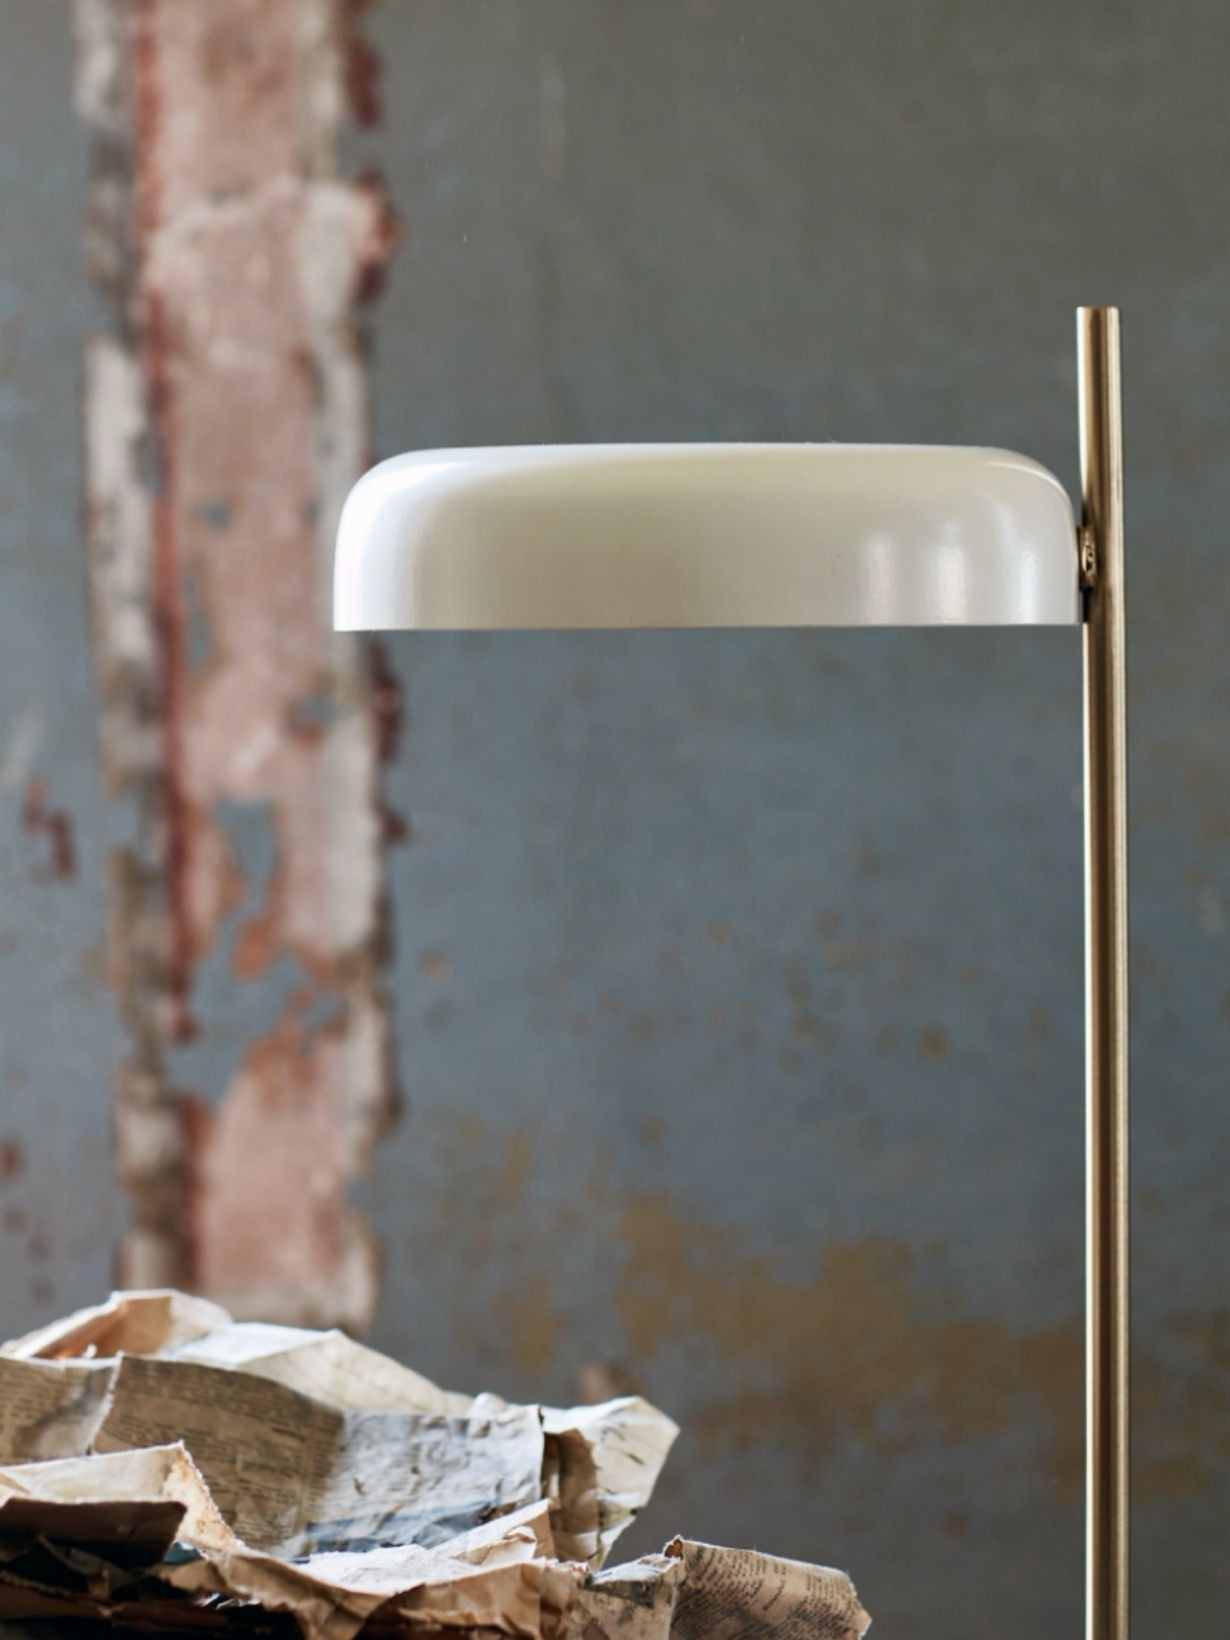 Olsson JensenTable lamp in white metal and brass, Mario